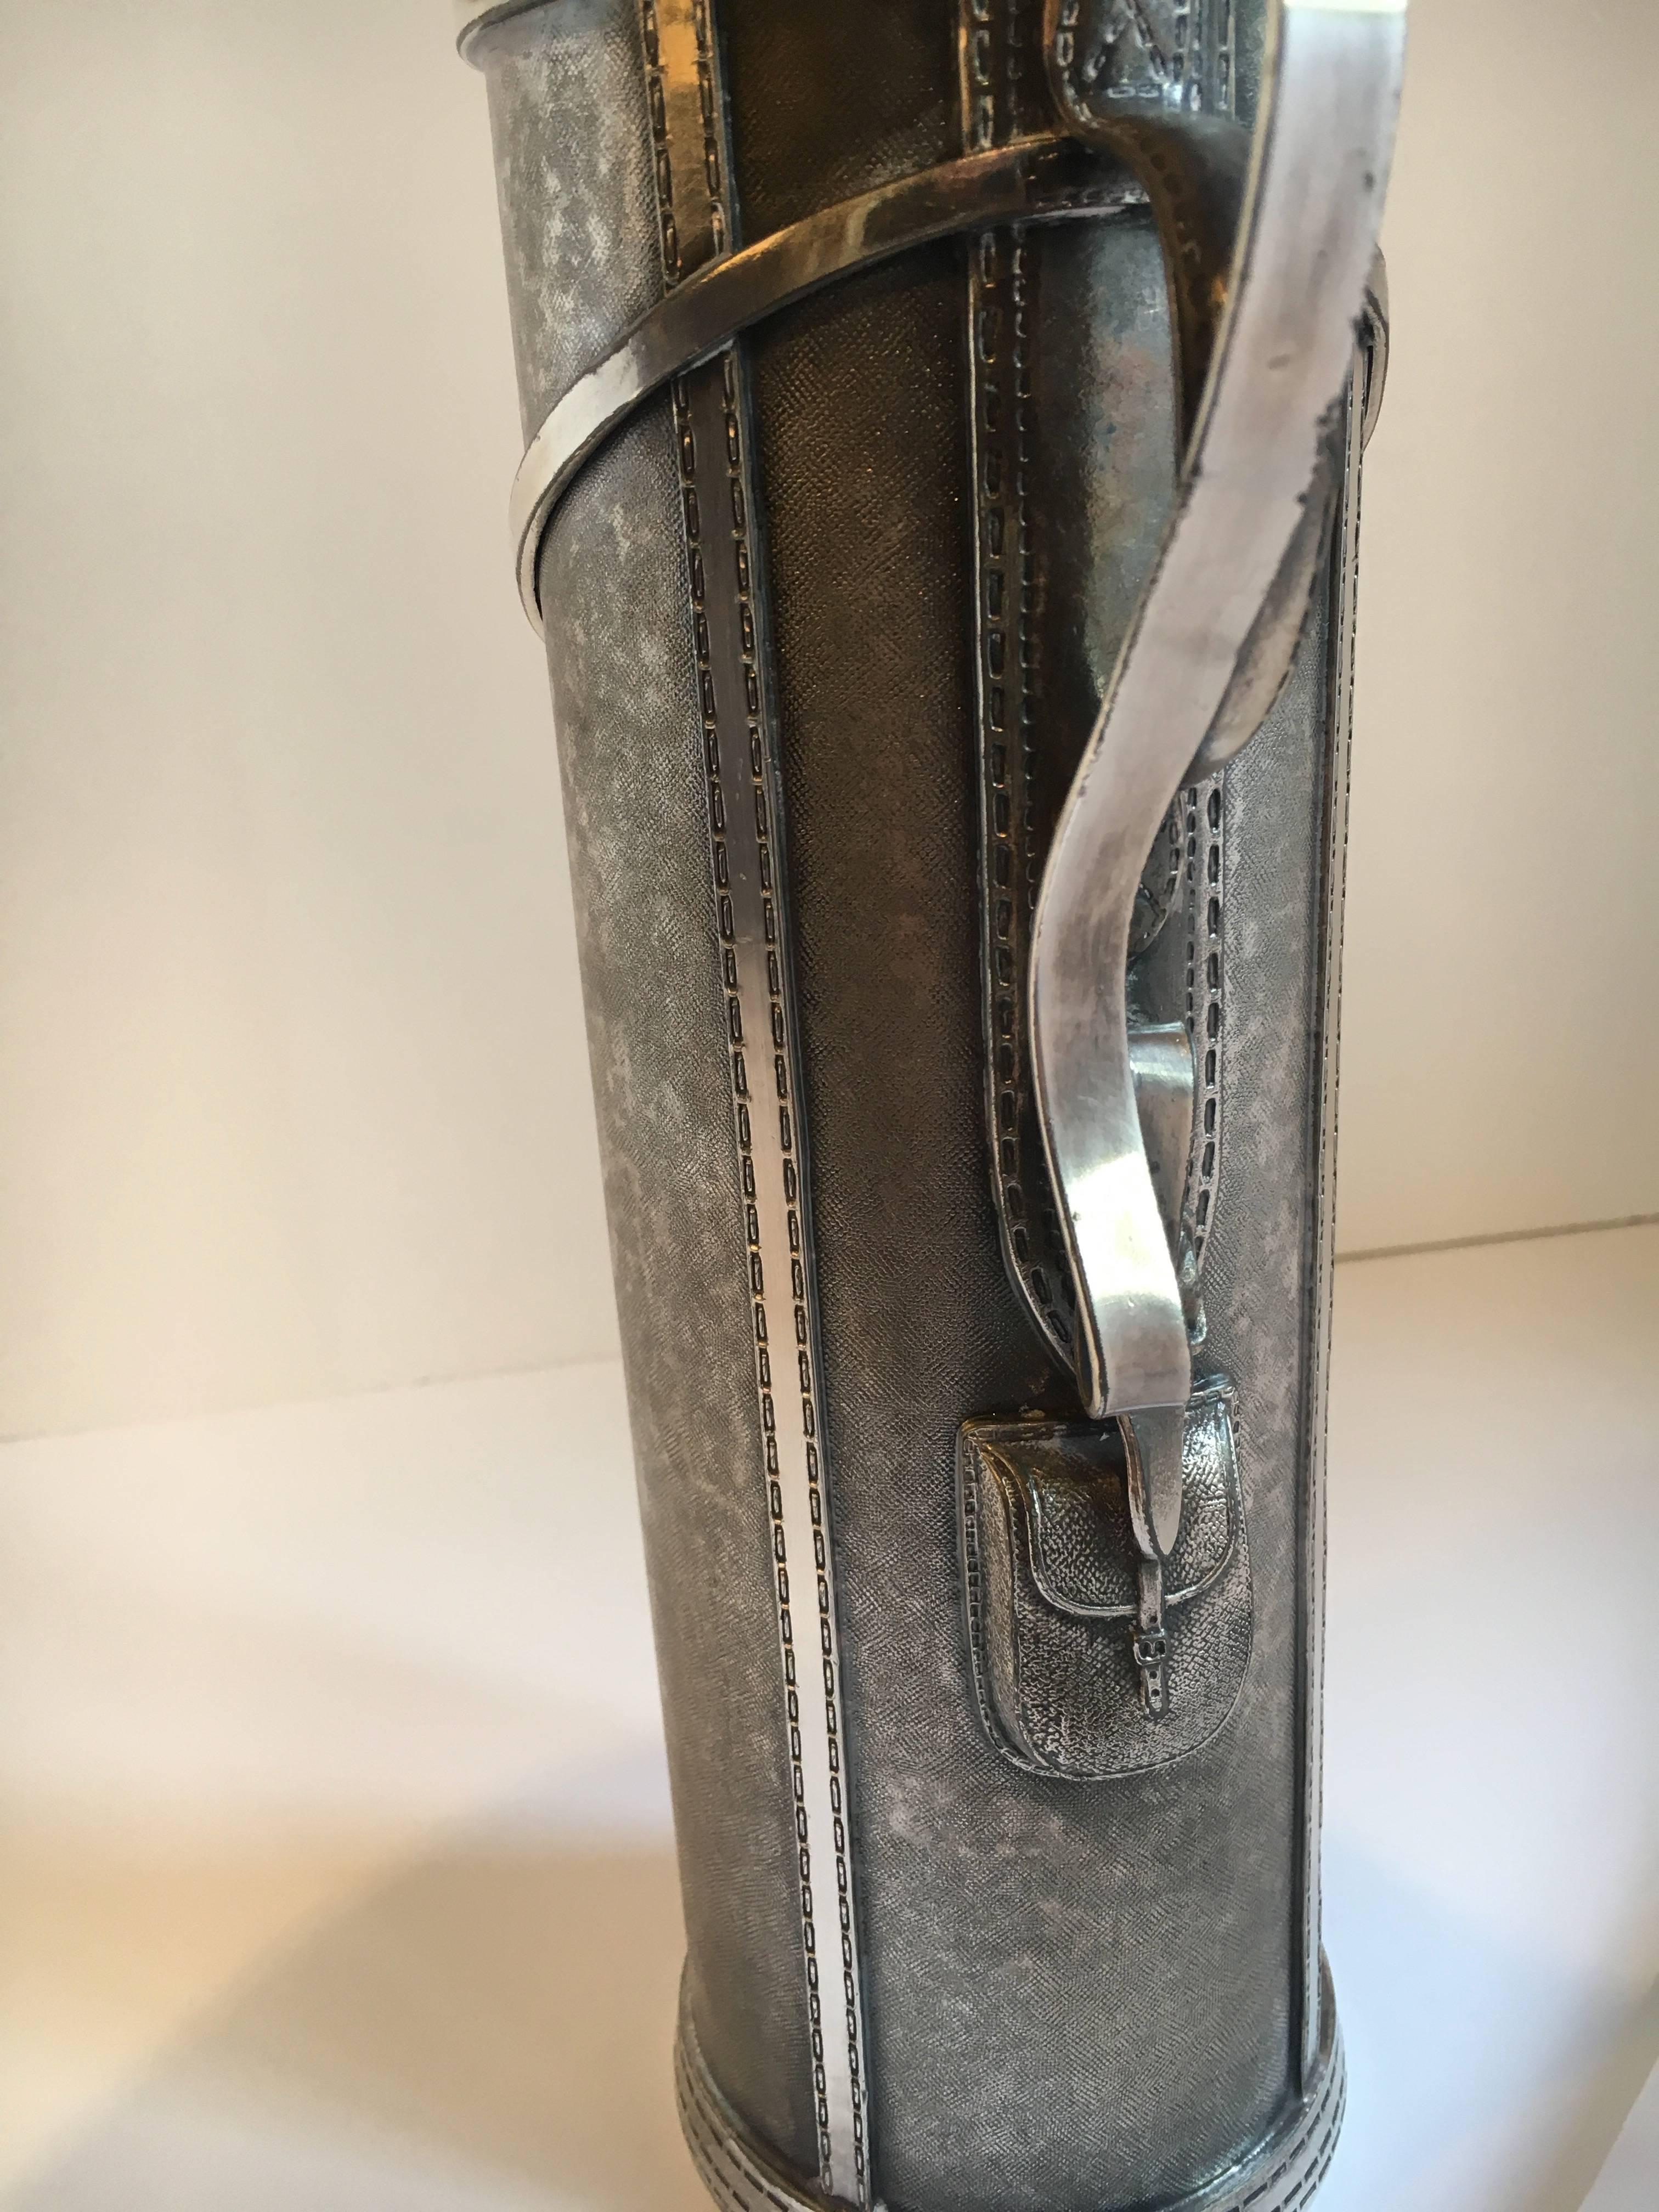 An exact duplicate of a golf bag, detailed down to the stitching, this Shaker, by George J. Berry is the first Art Deco cocktail Shaker made in the image of another object, i.e., the golf bag - an important S. P. Piece, this shaker not only is a